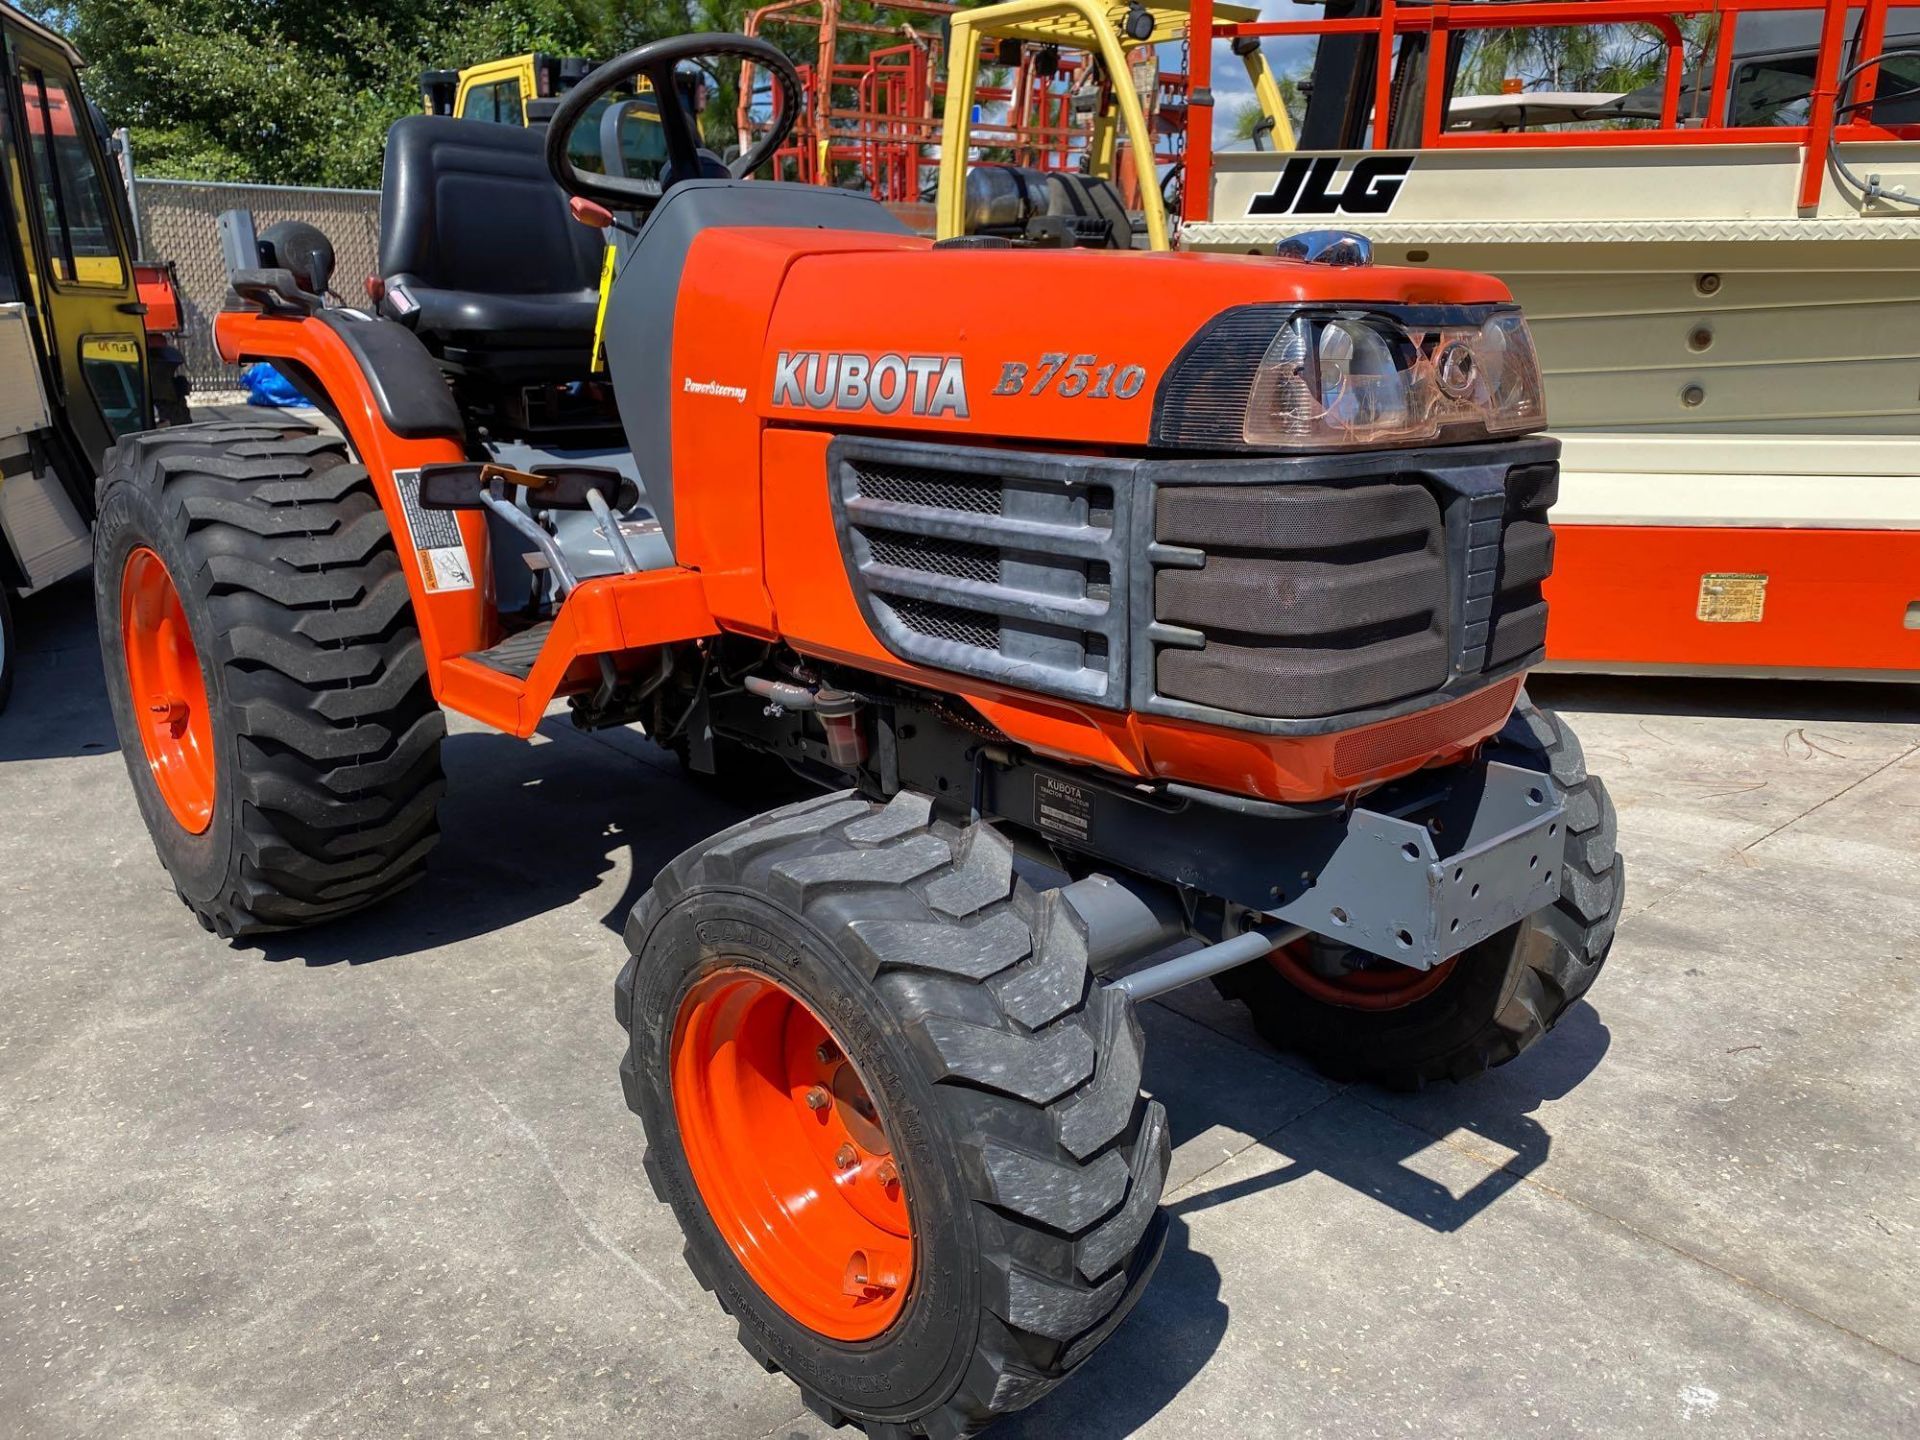 KUBOTA B7510 DIESEL TRACTOR, POWER STEERING, 1,433 HOURS SHOWING, 4WD, RUNS AND OPERATES - Image 2 of 8